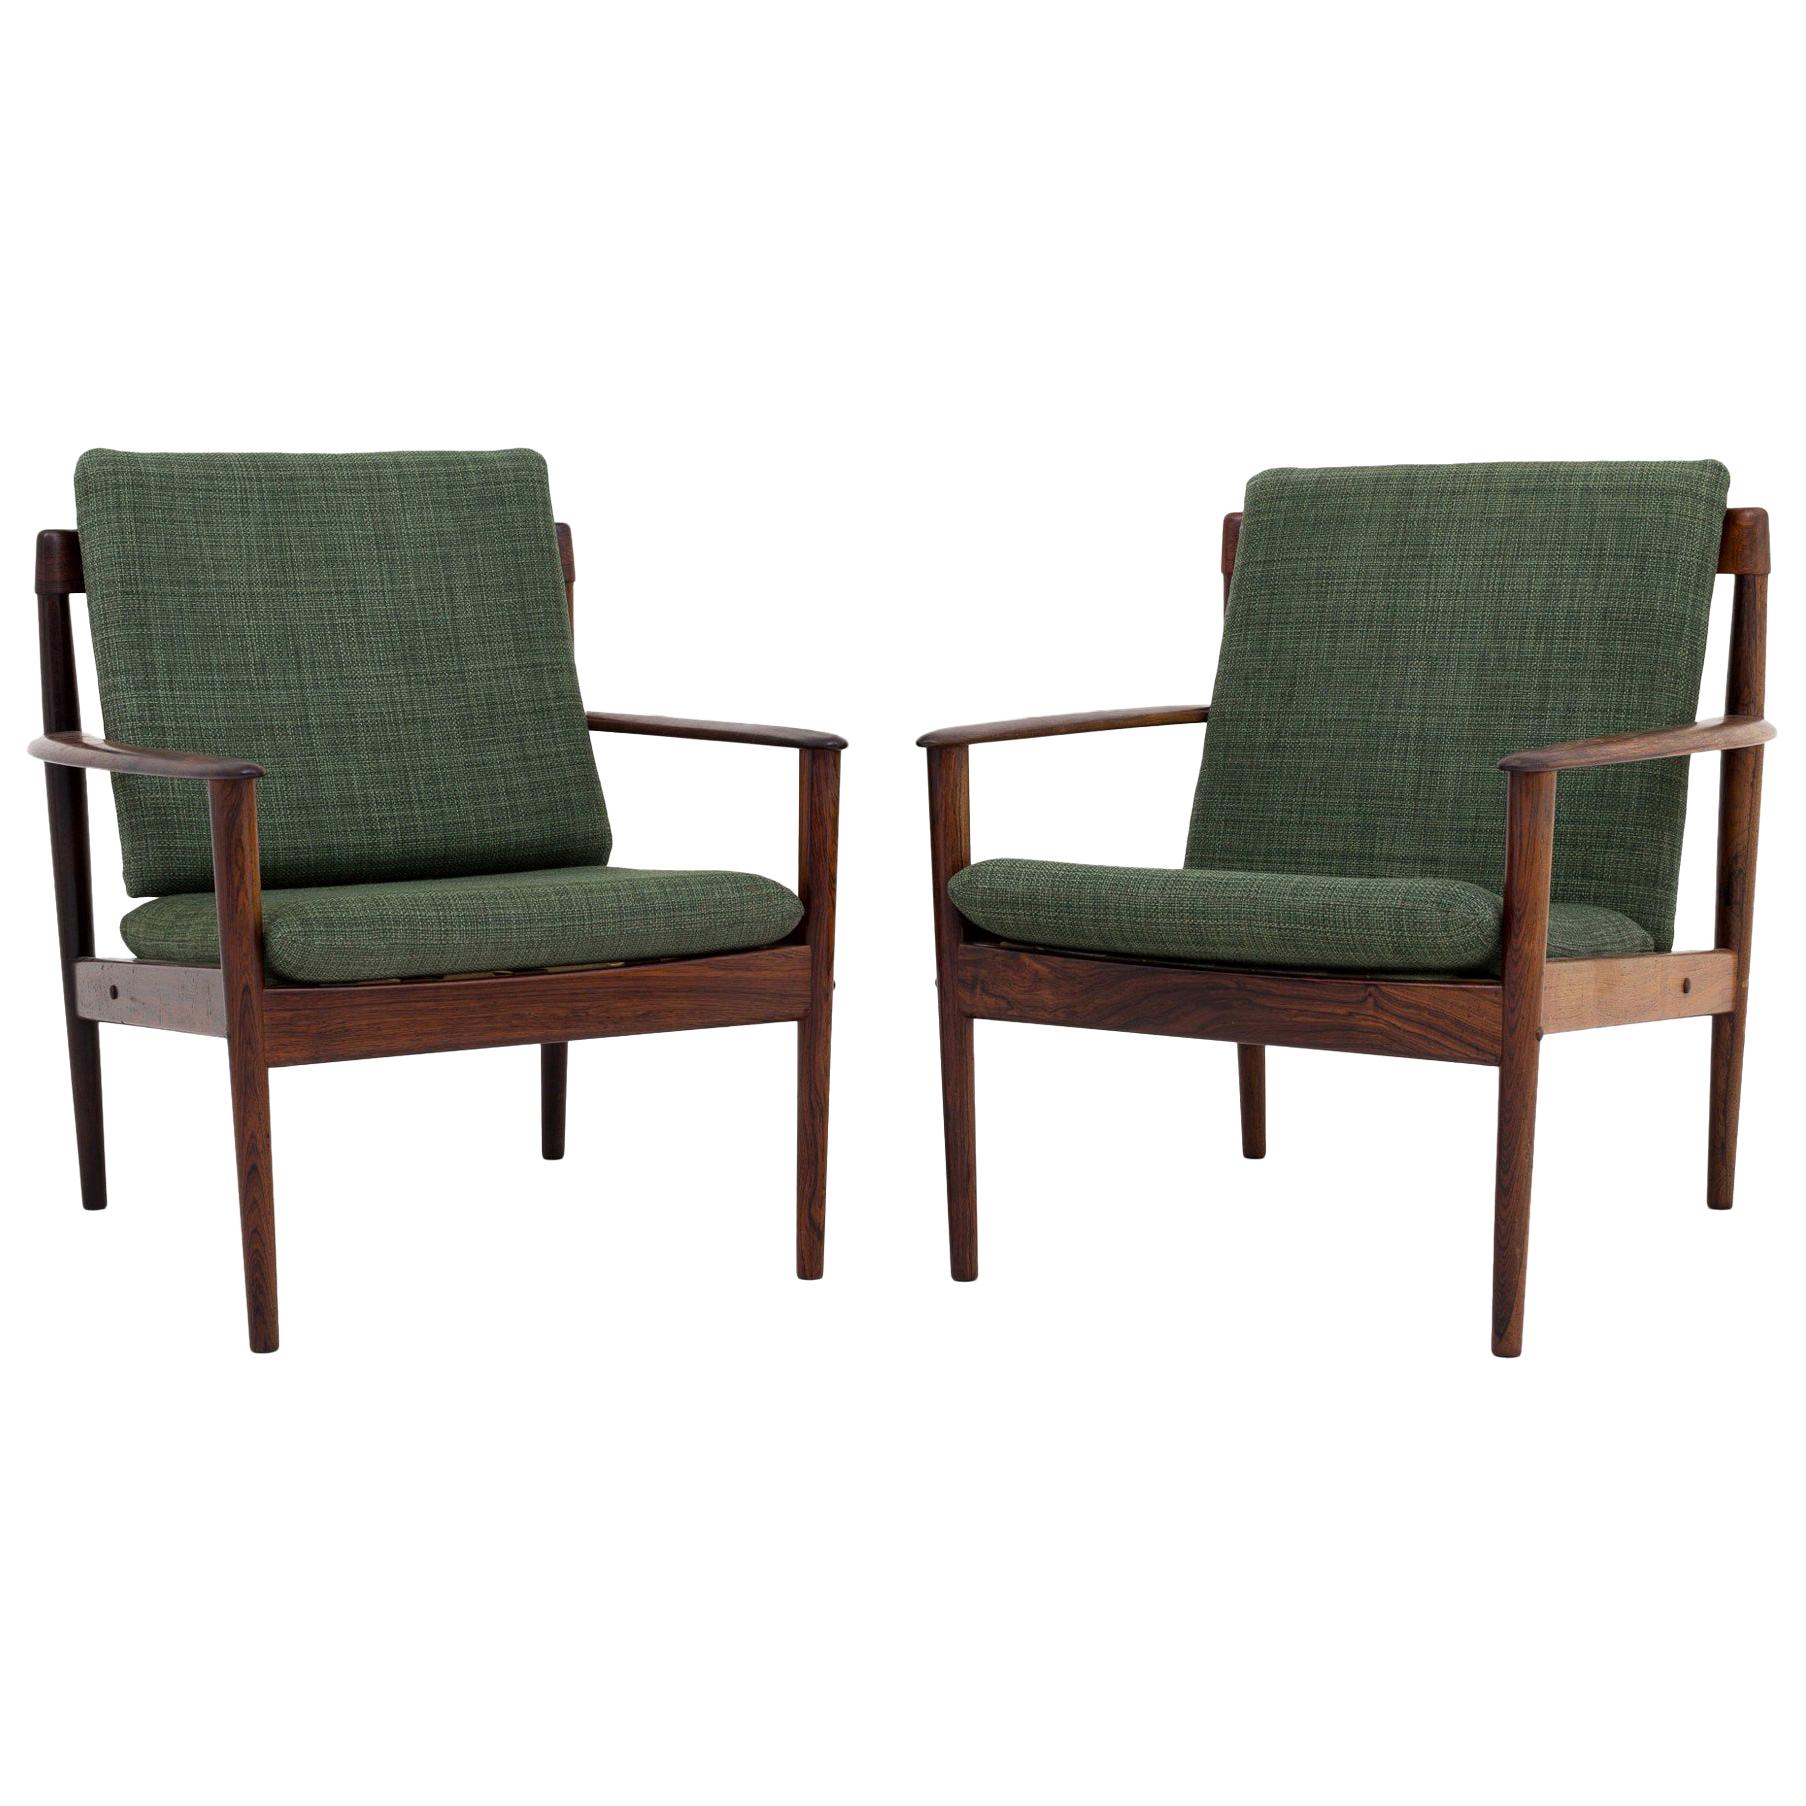 Set of Two Armchairs by Grete Jalk